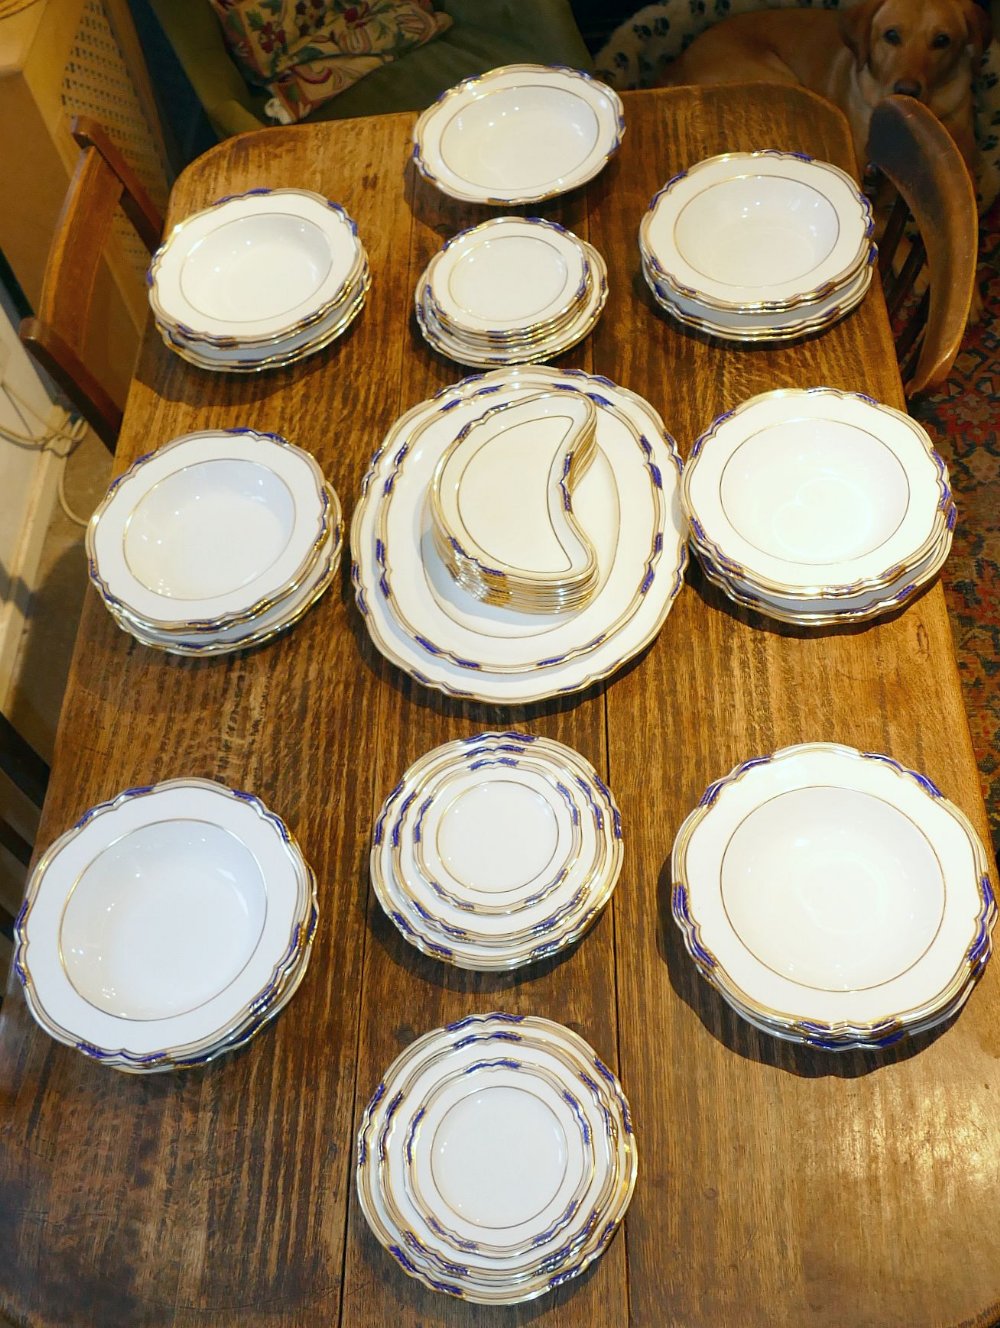 A Spode Copeland dinner service, pattern number 9688 in cobalt blue and gilt, an early variation